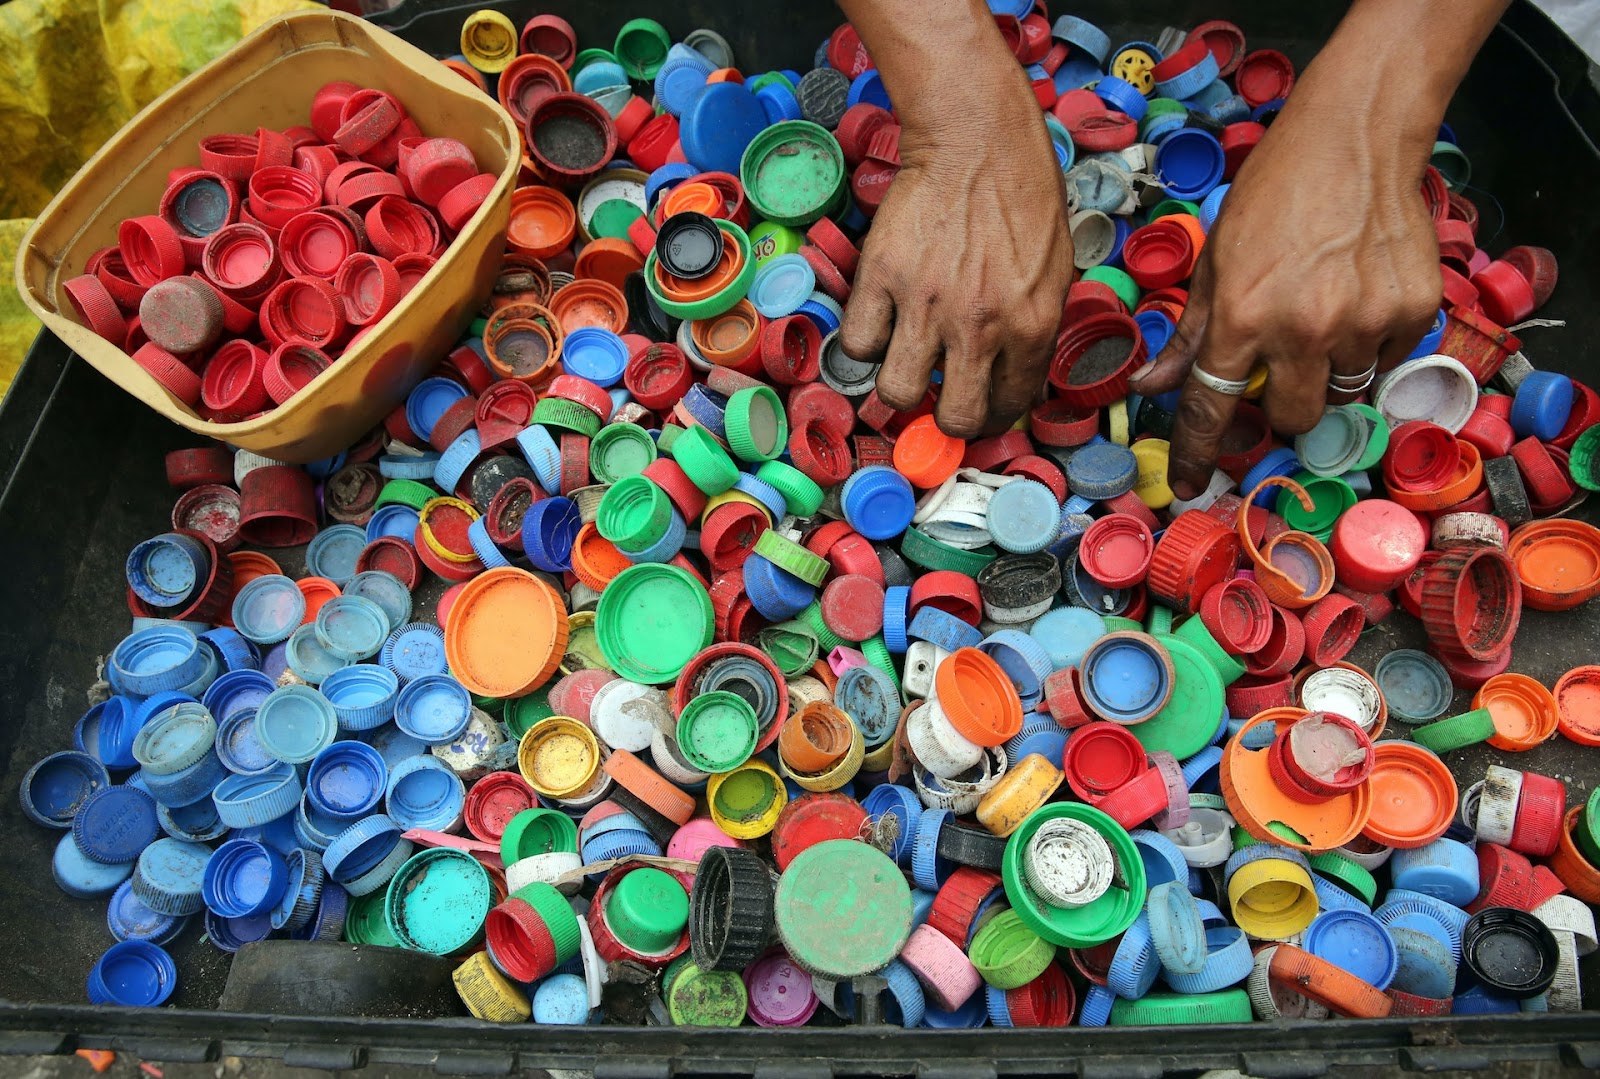 Person sorting bottle caps